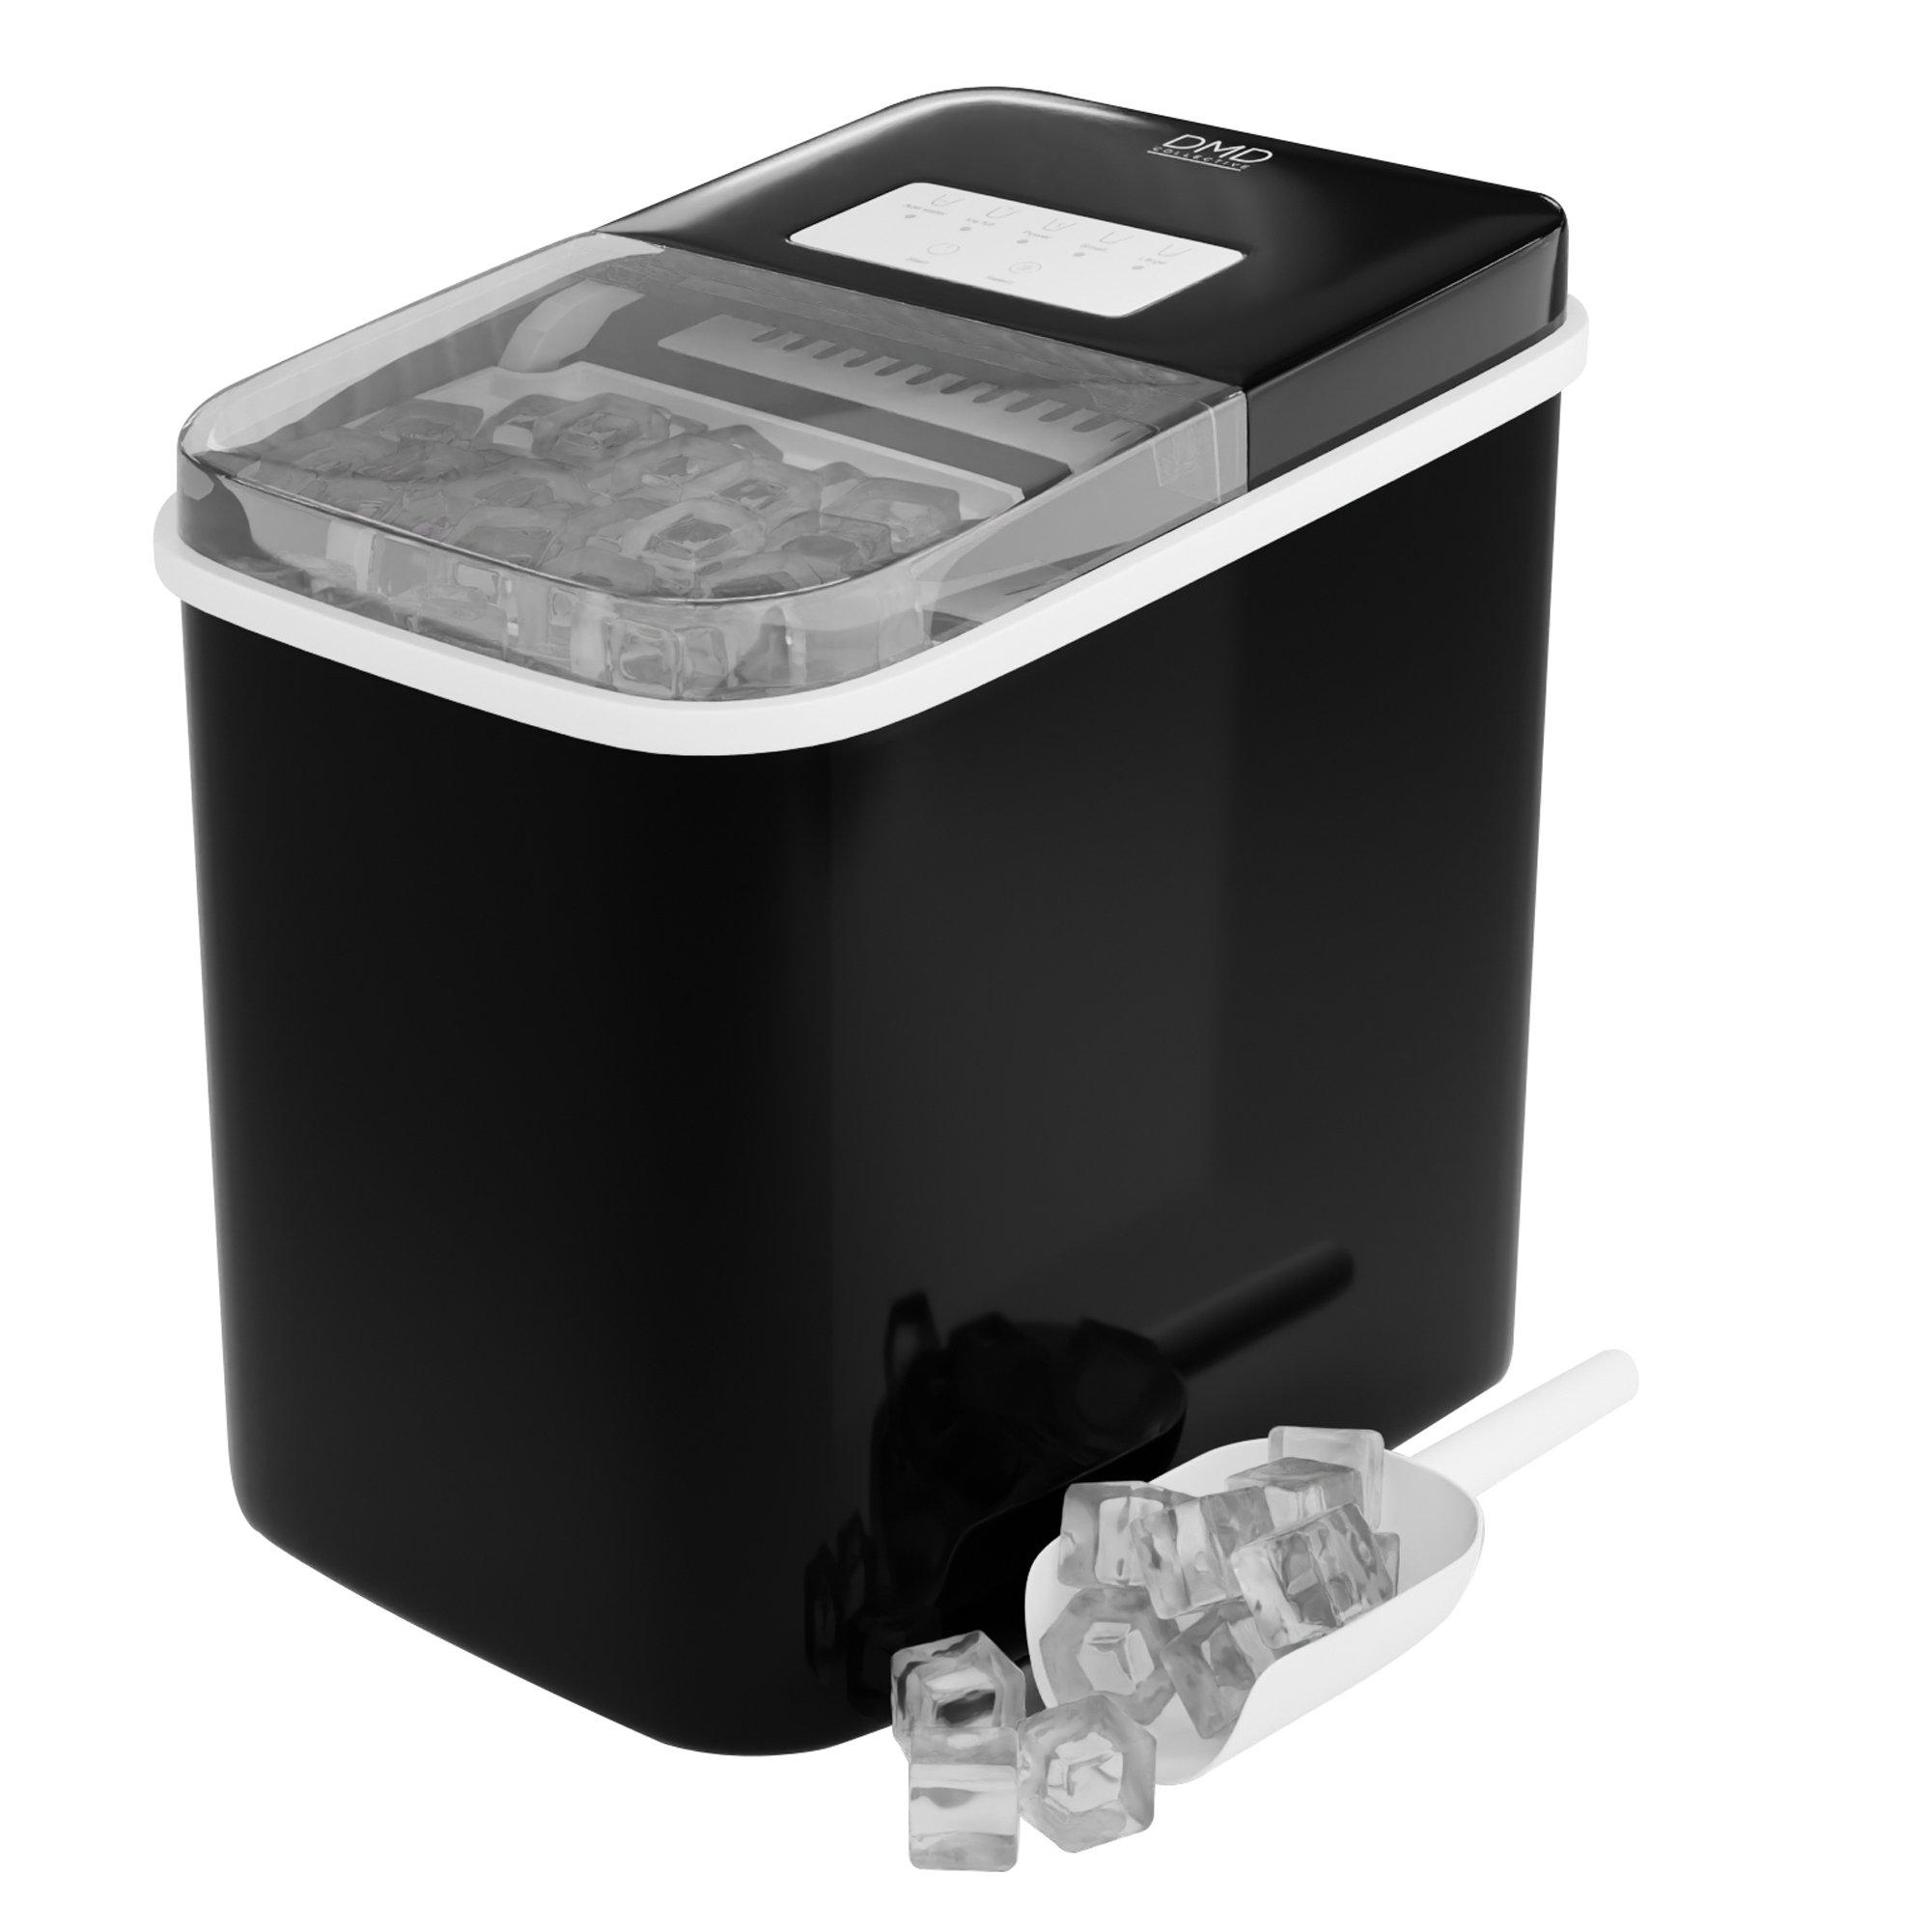 IceWhiz Portable Countertop Ice Maker Automatic Cleaning 12kg/24hr with Scoop & Basket